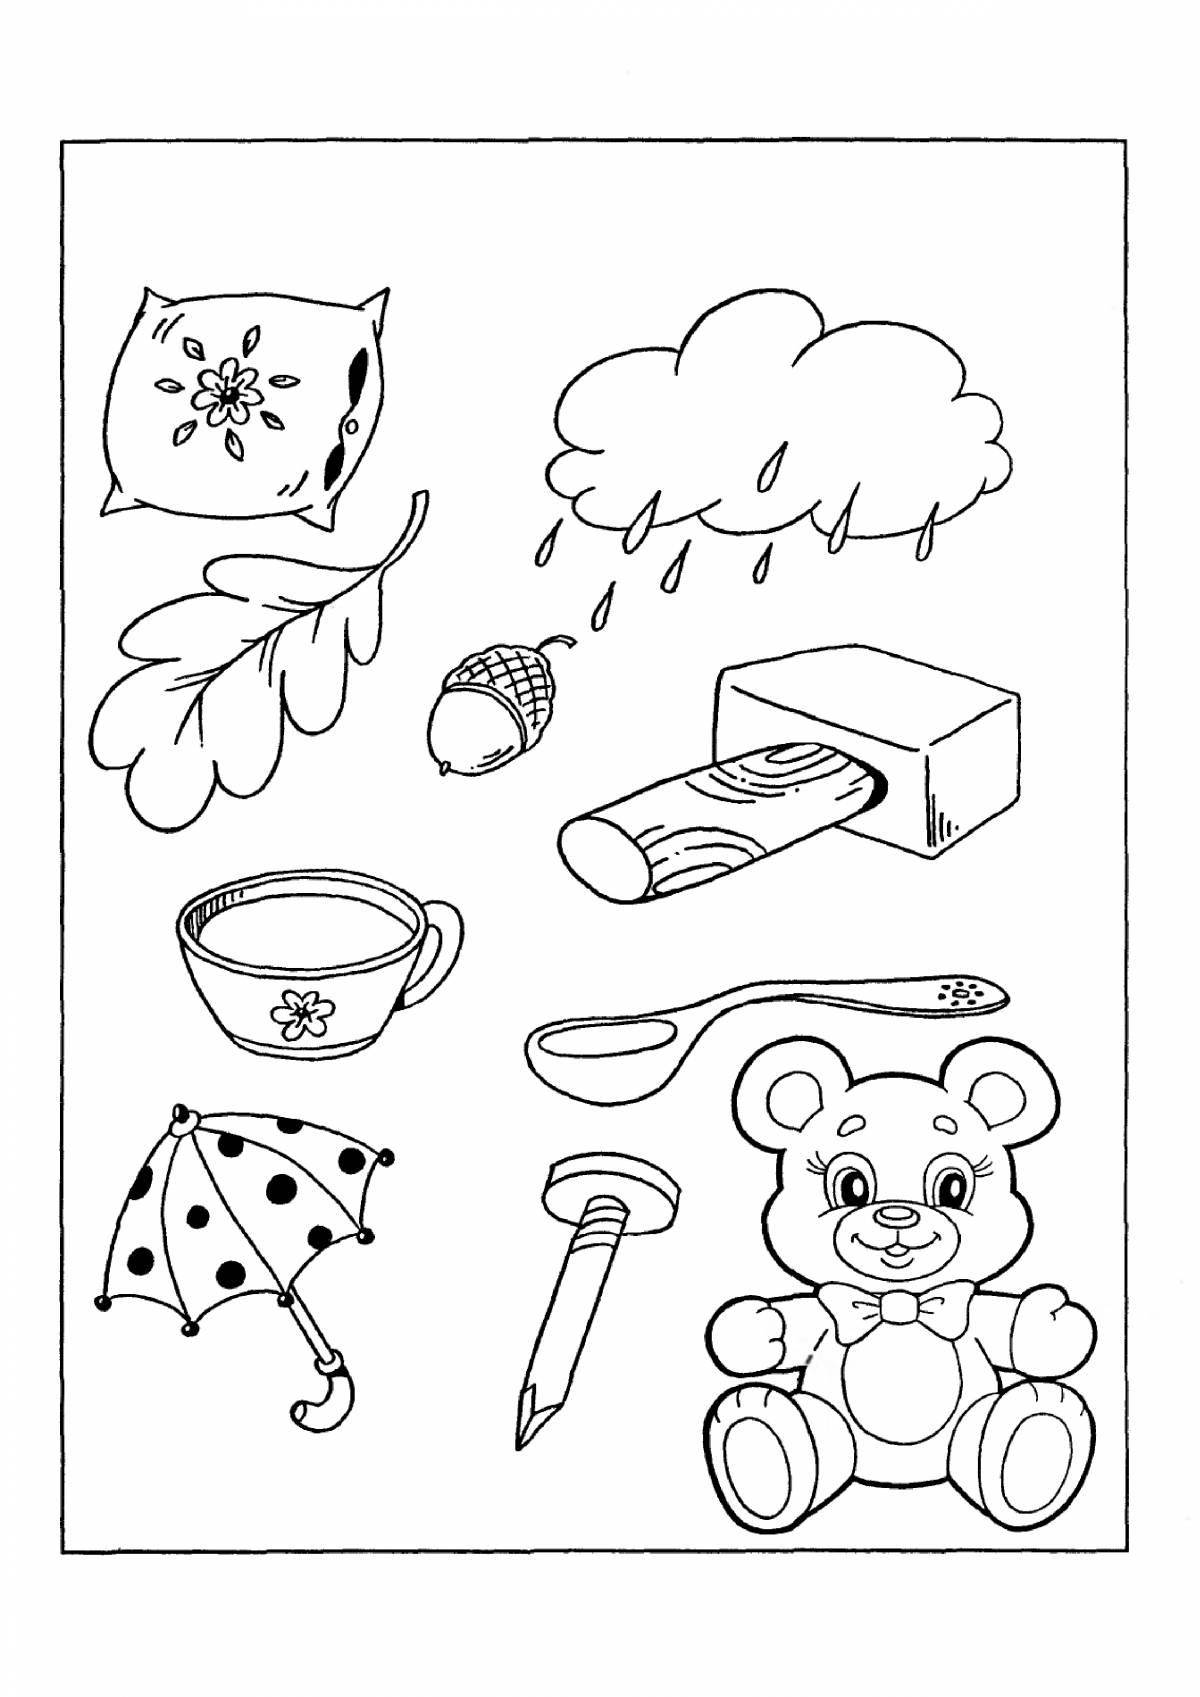 A fascinating coloring book 3-4 years old